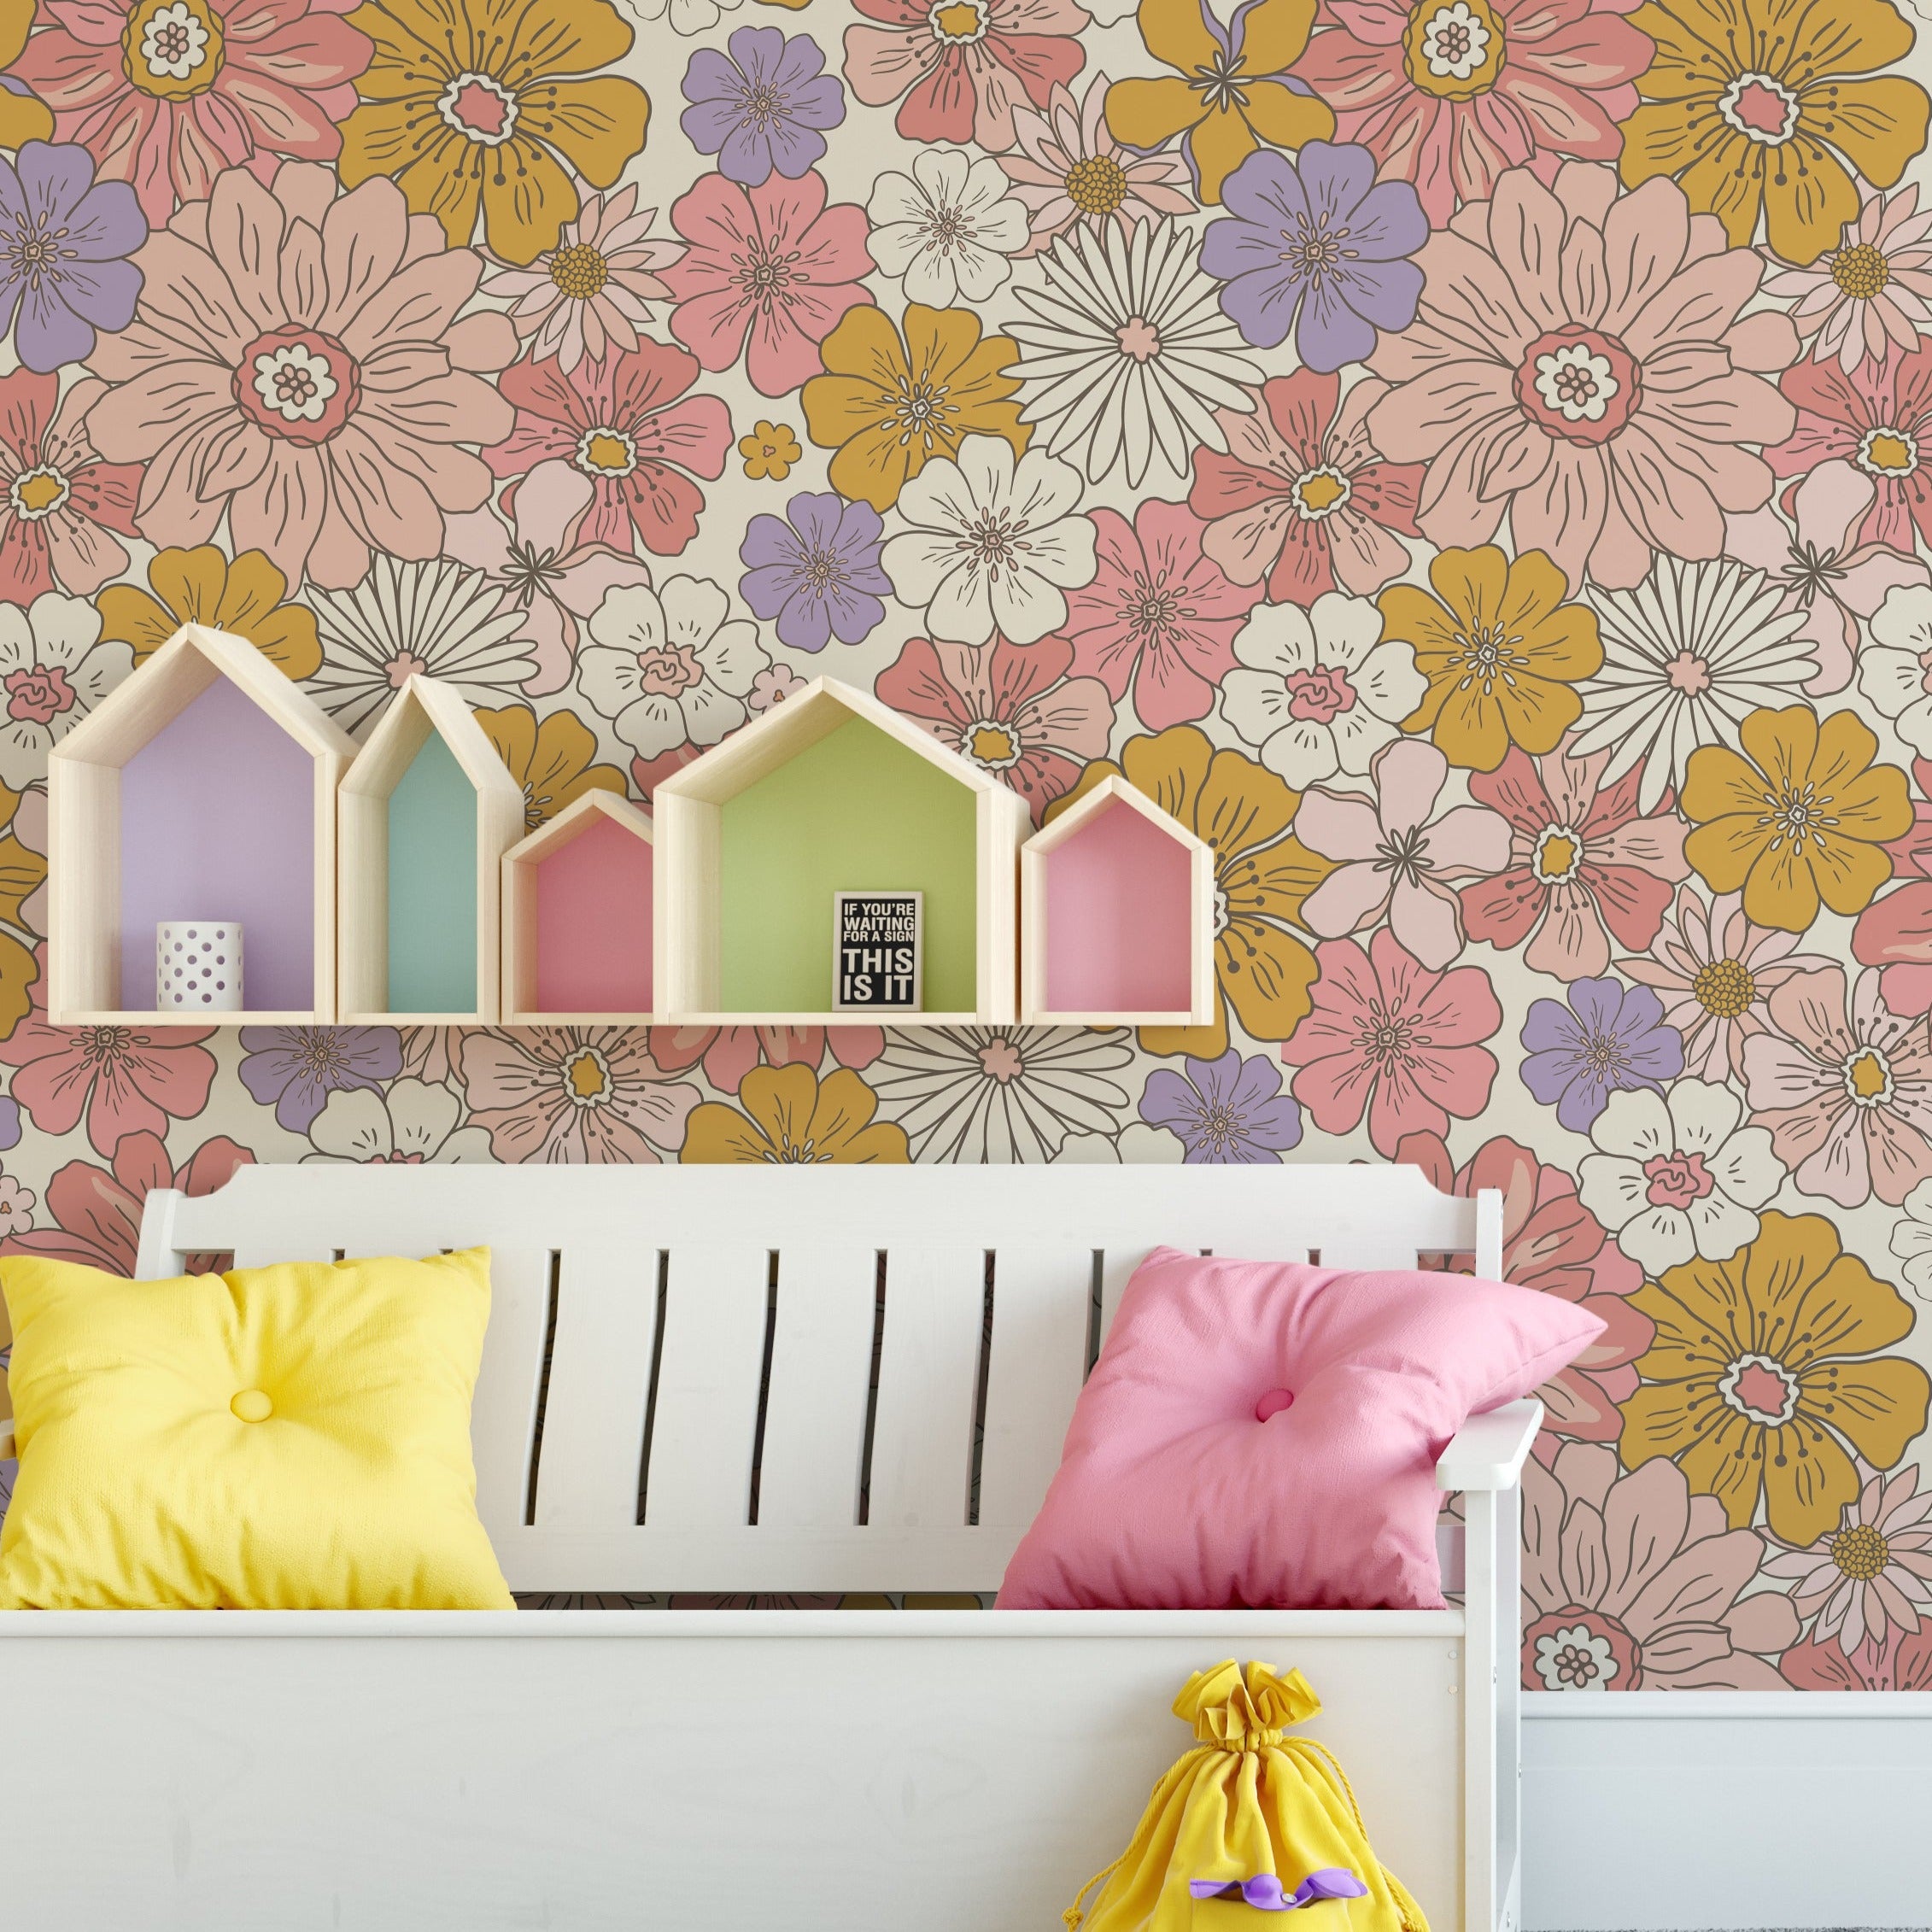 A playful children's room decorated with Retro Groovy Flower Wallpaper, which boasts a colorful floral pattern. The room features a white bed, colorful house-shaped shelves, and a bright interior that complements the lively wallpaper